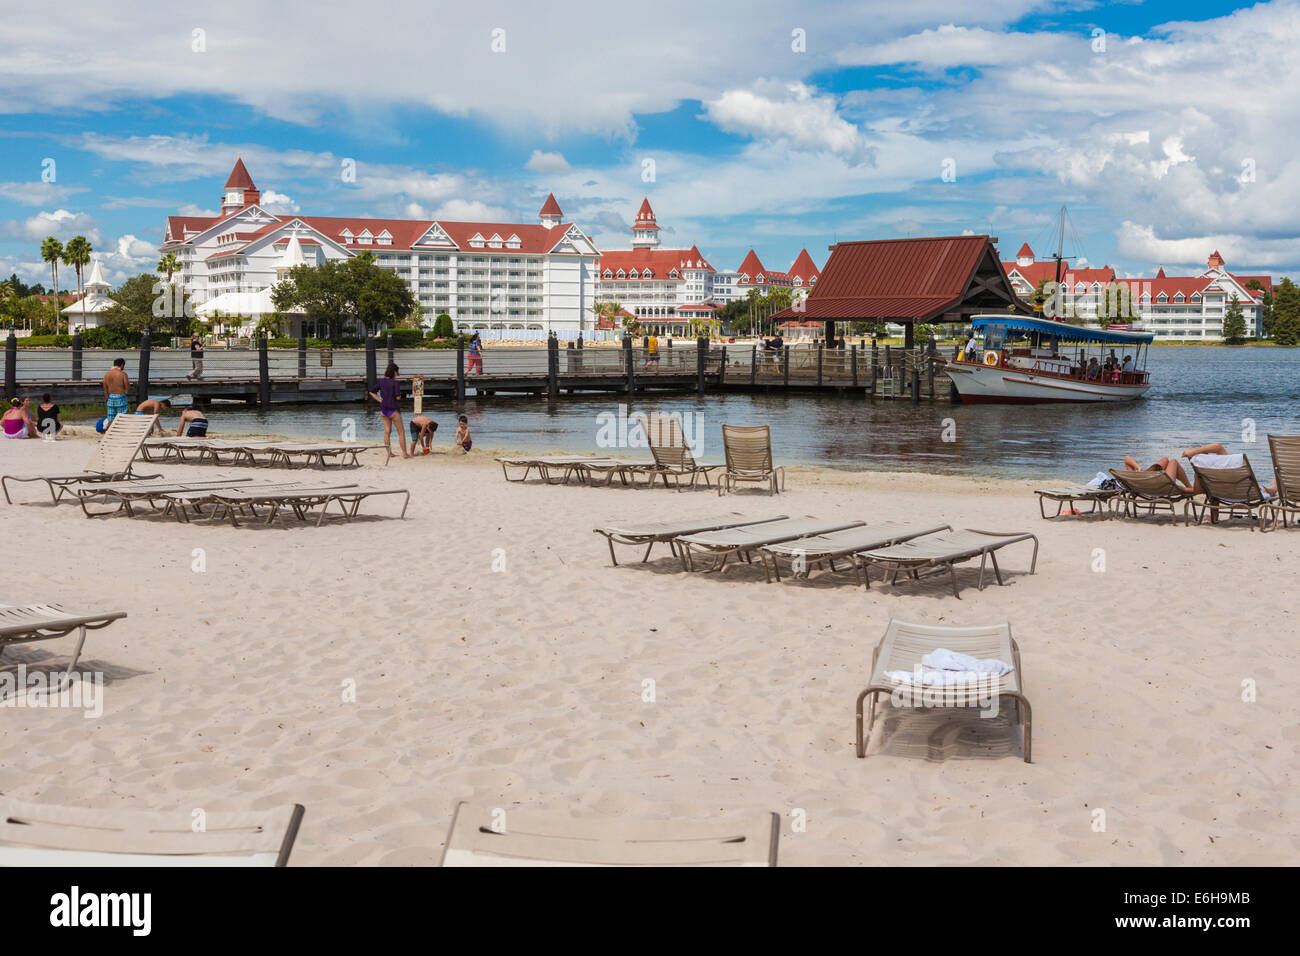 Disney's Grand Floridian Resort and Spa as seen from the Polynesian Resort in Walt Disney World, Florida Stock Photo